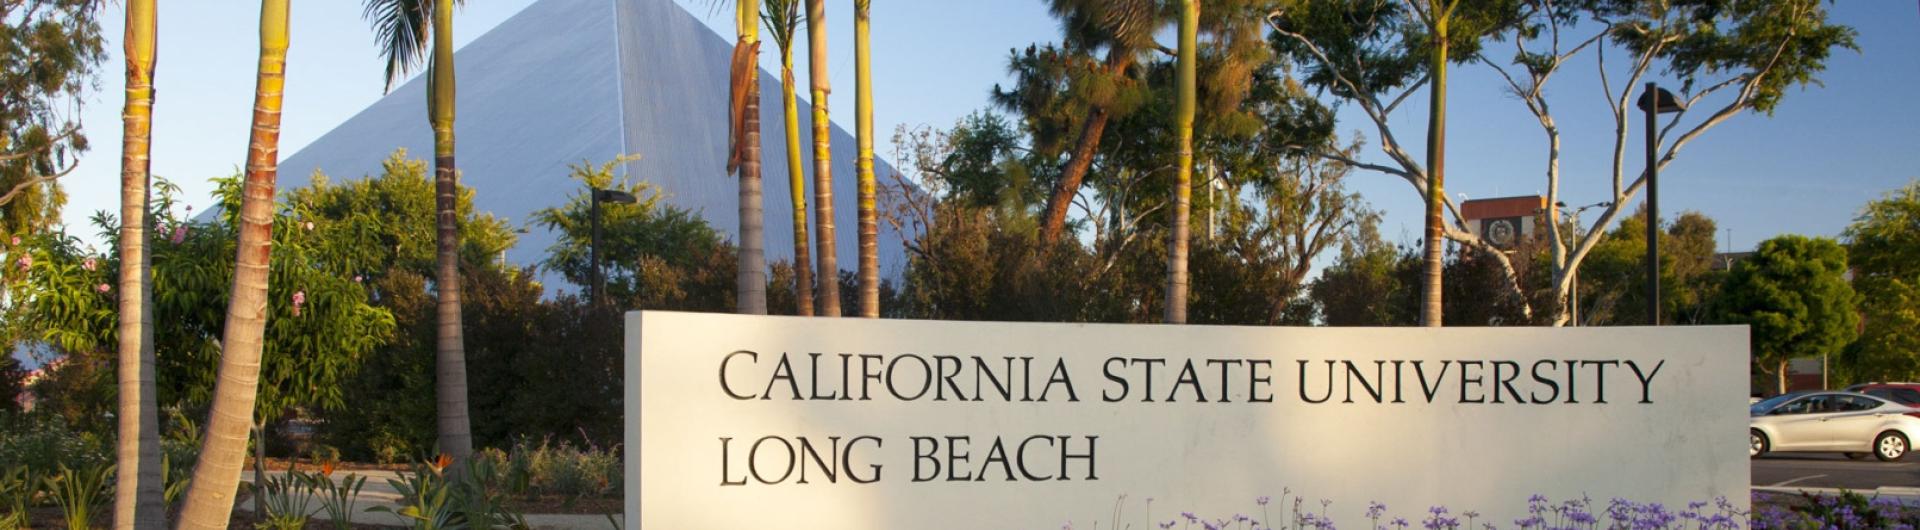 California State Univeristy Sign with Pyramid